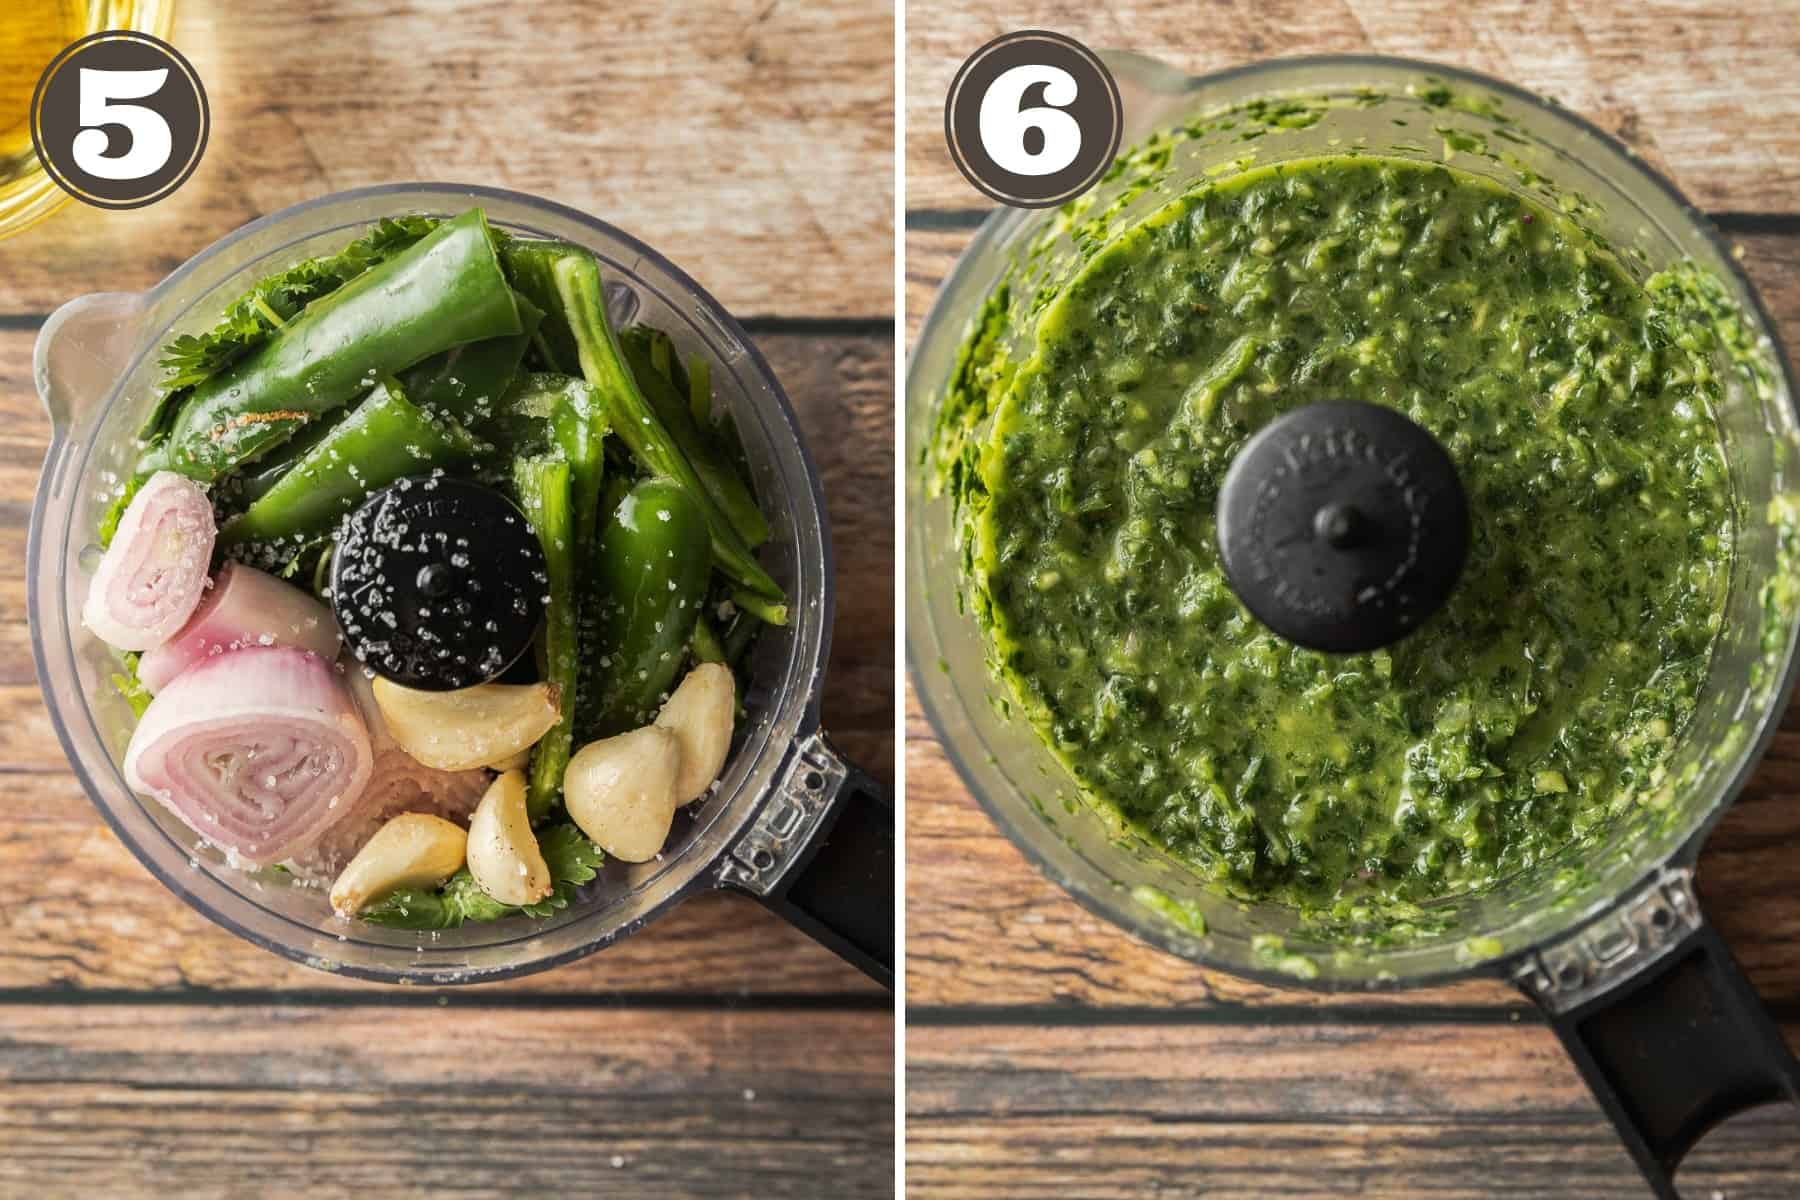 Side by side photos showing all chimichurri ingredients in a food processor before and after blending.